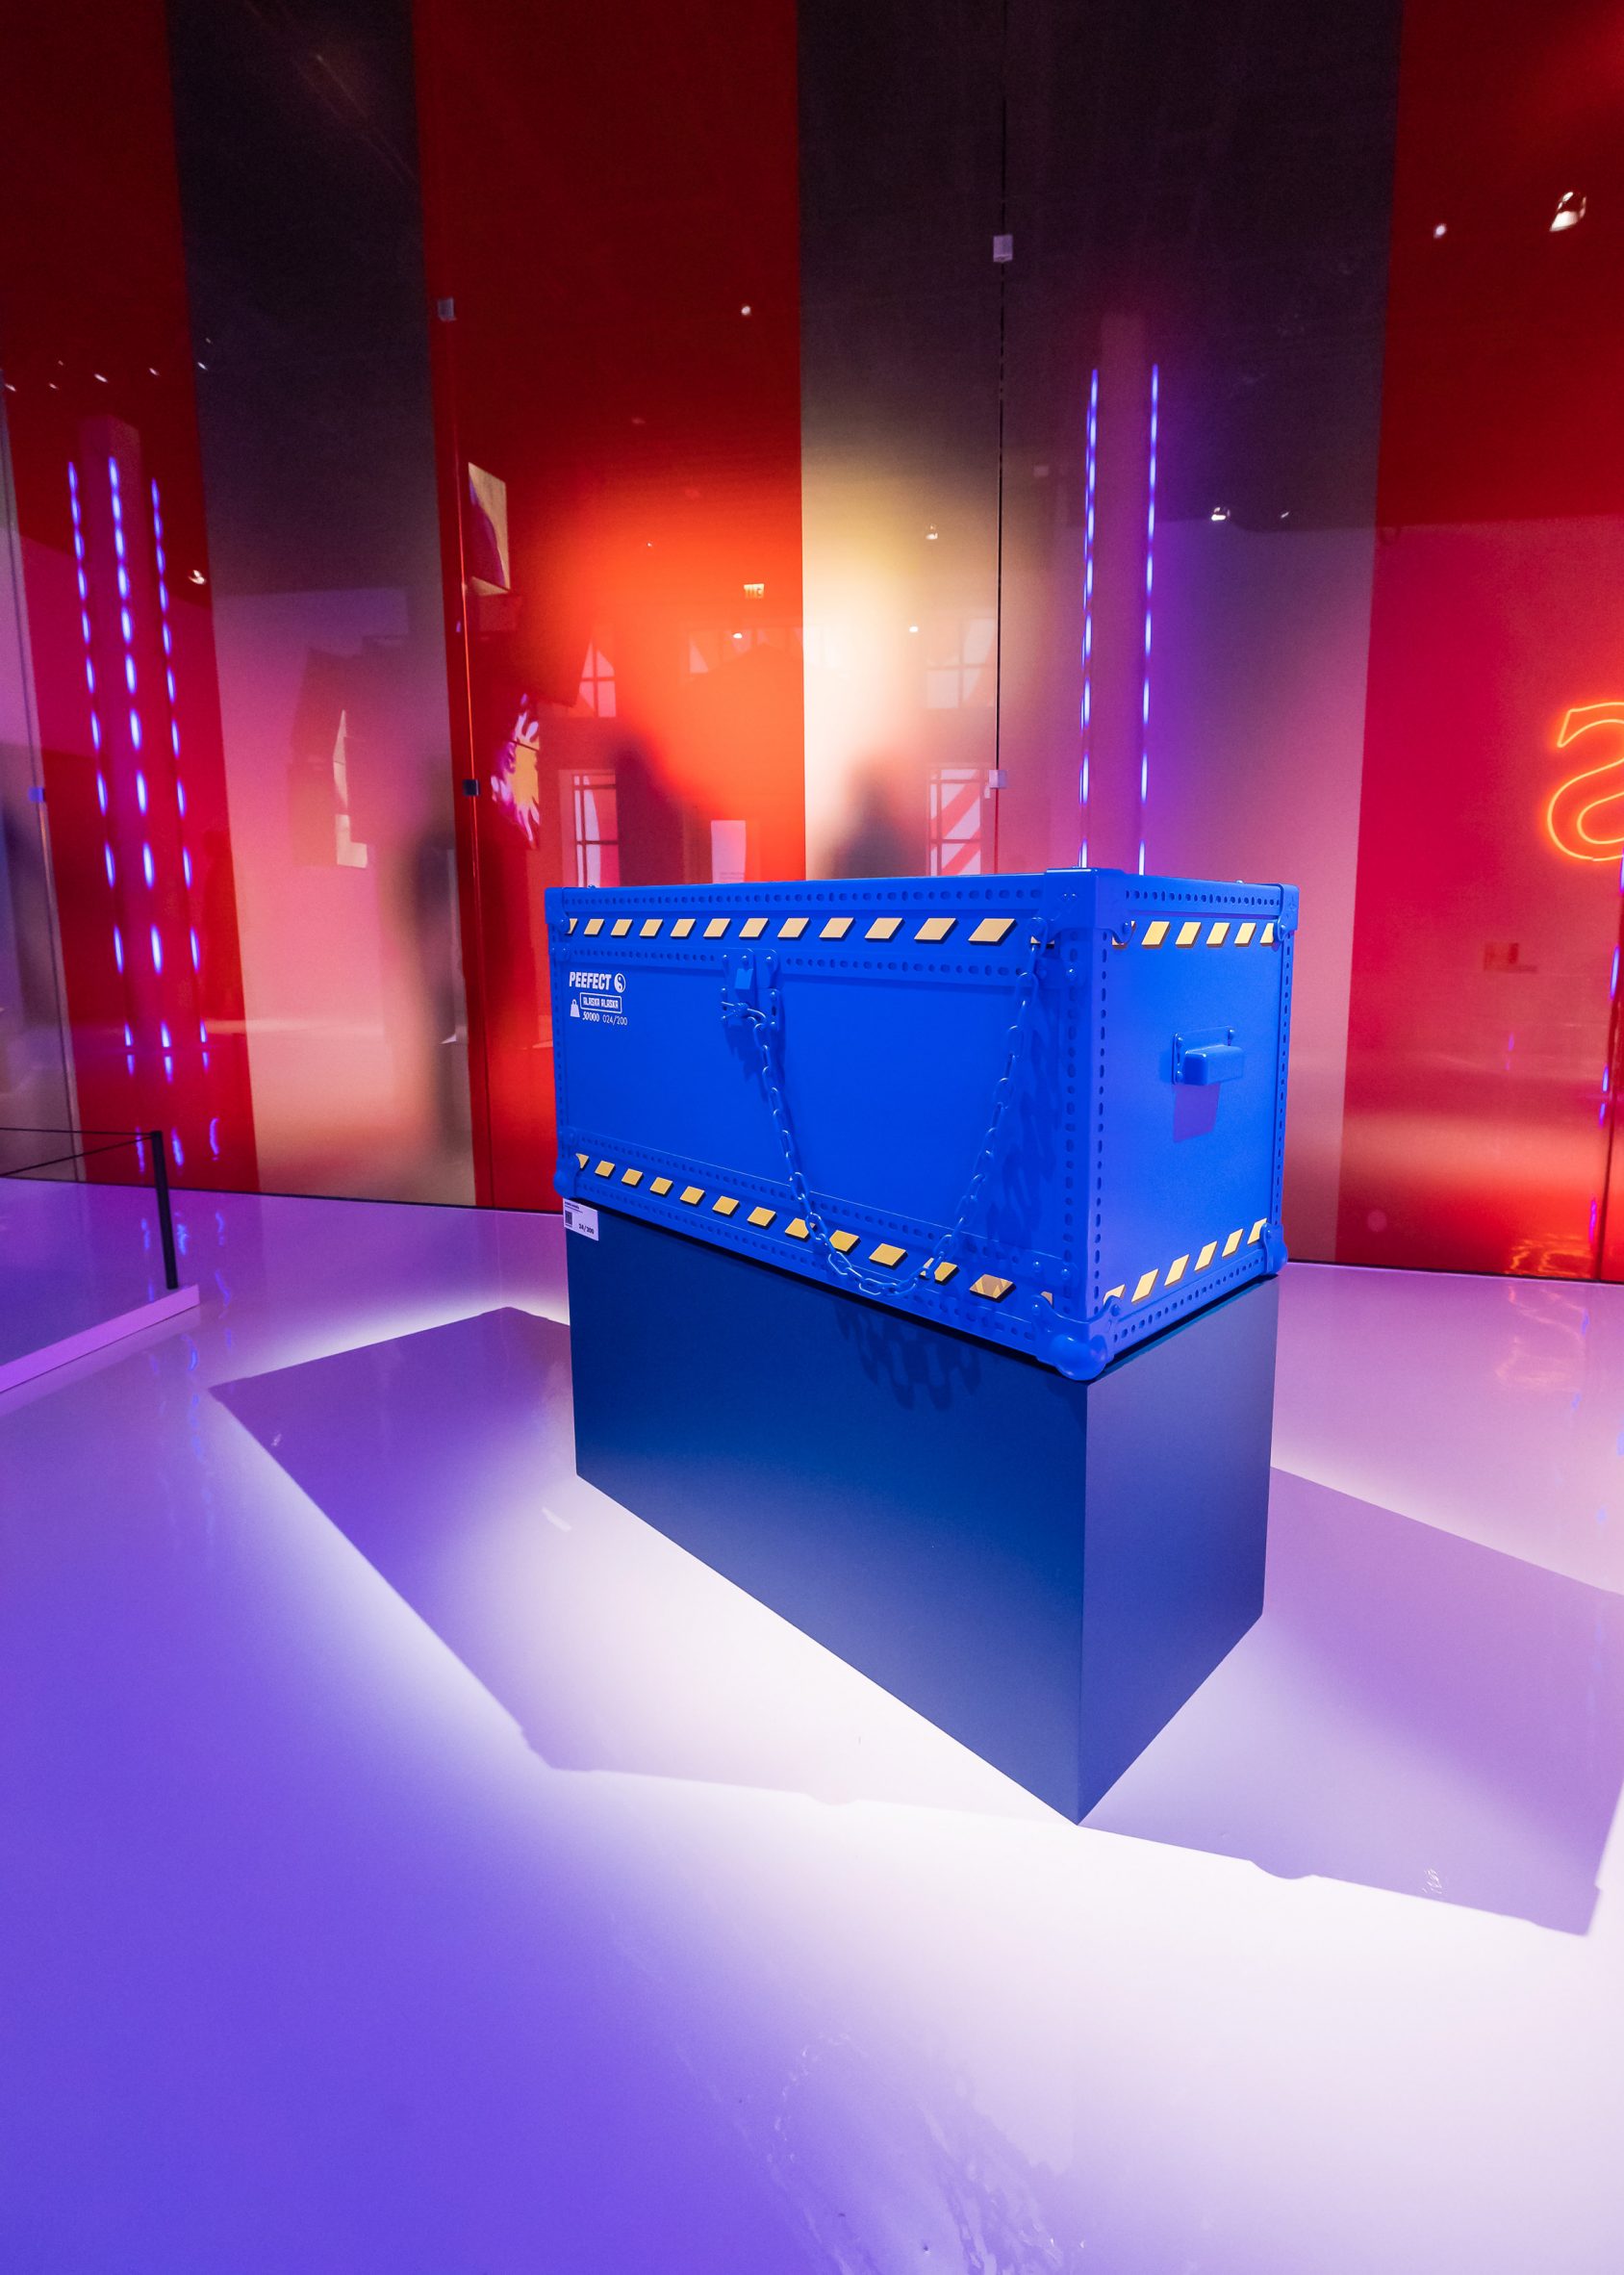 200 Trunks, 200 Visionaries: The Exhibition by Louis Vuitton - Eclectic Kim